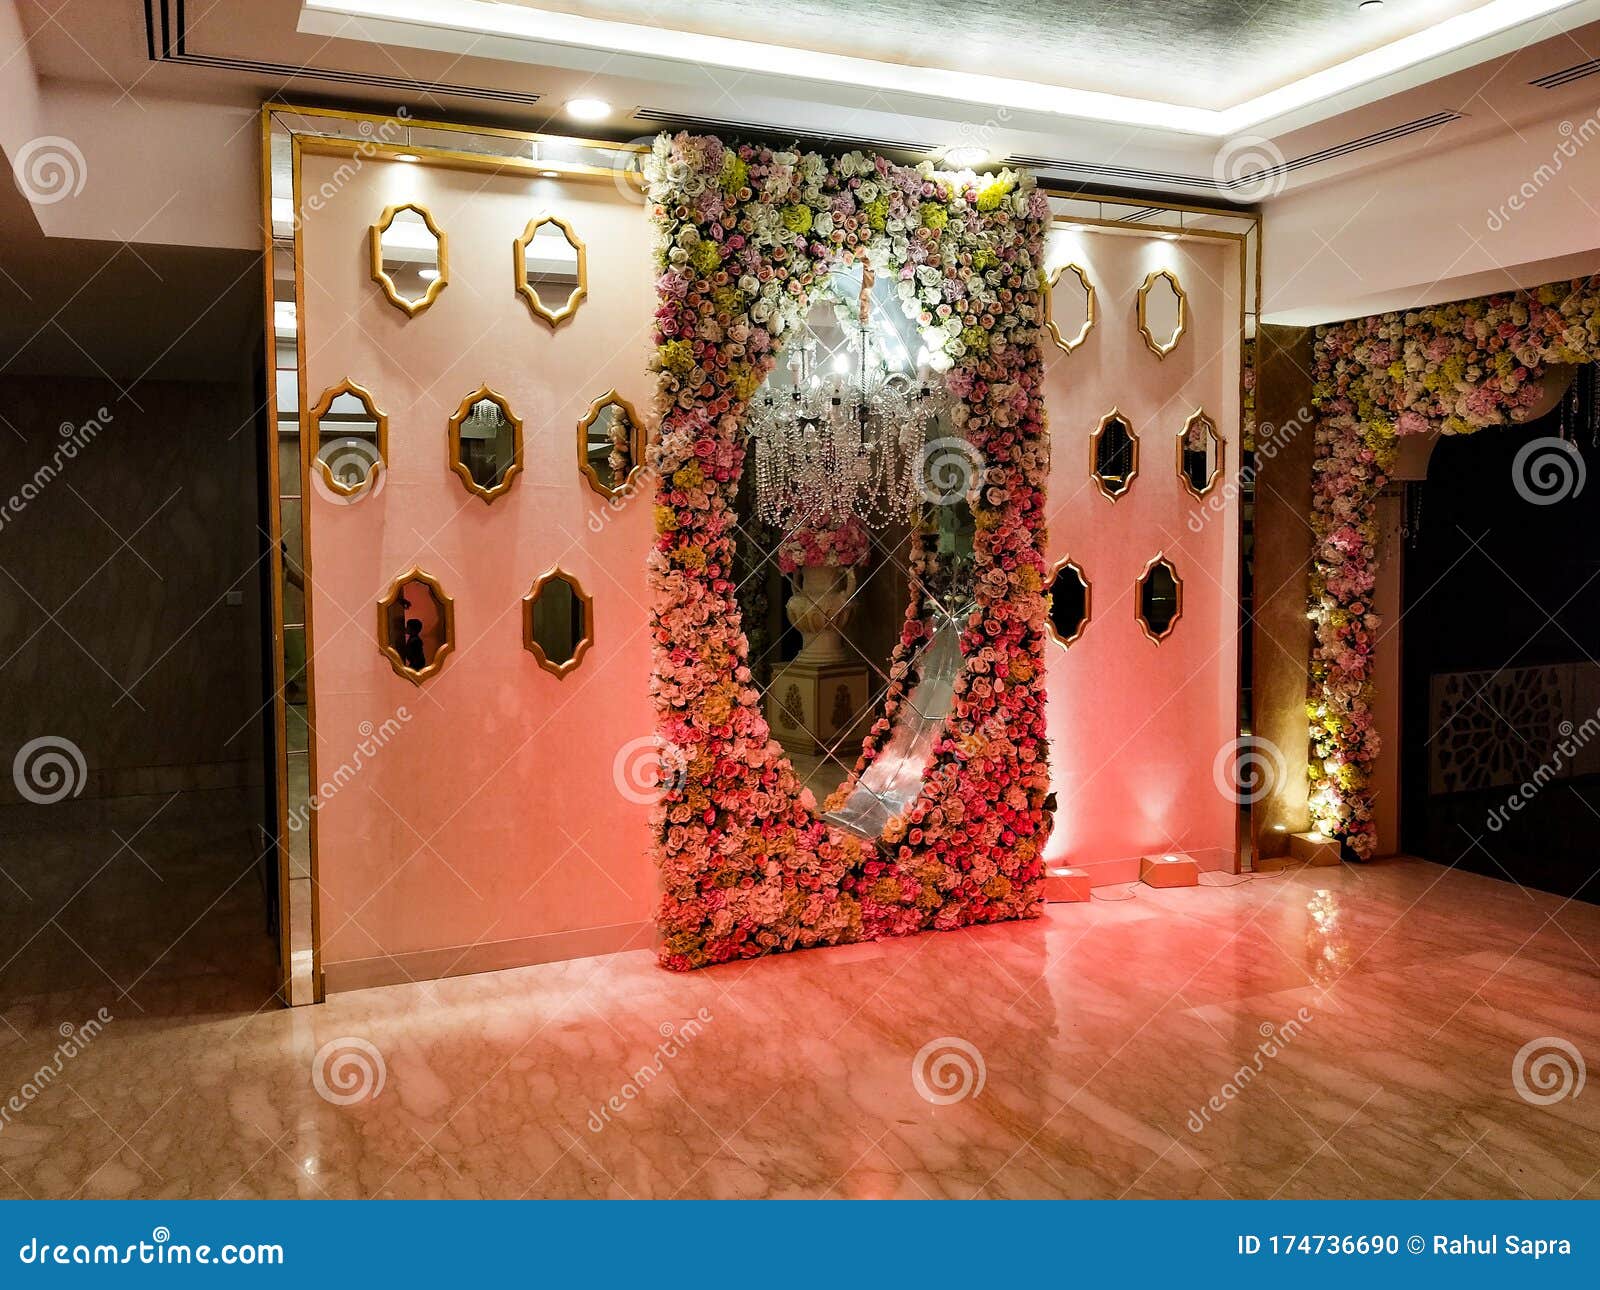 Flowers Decoration Inside Indian Wedding Banquet Hall during Evening Time  in Delhi India Stock Photo - Image of flowers, wedding: 174736690